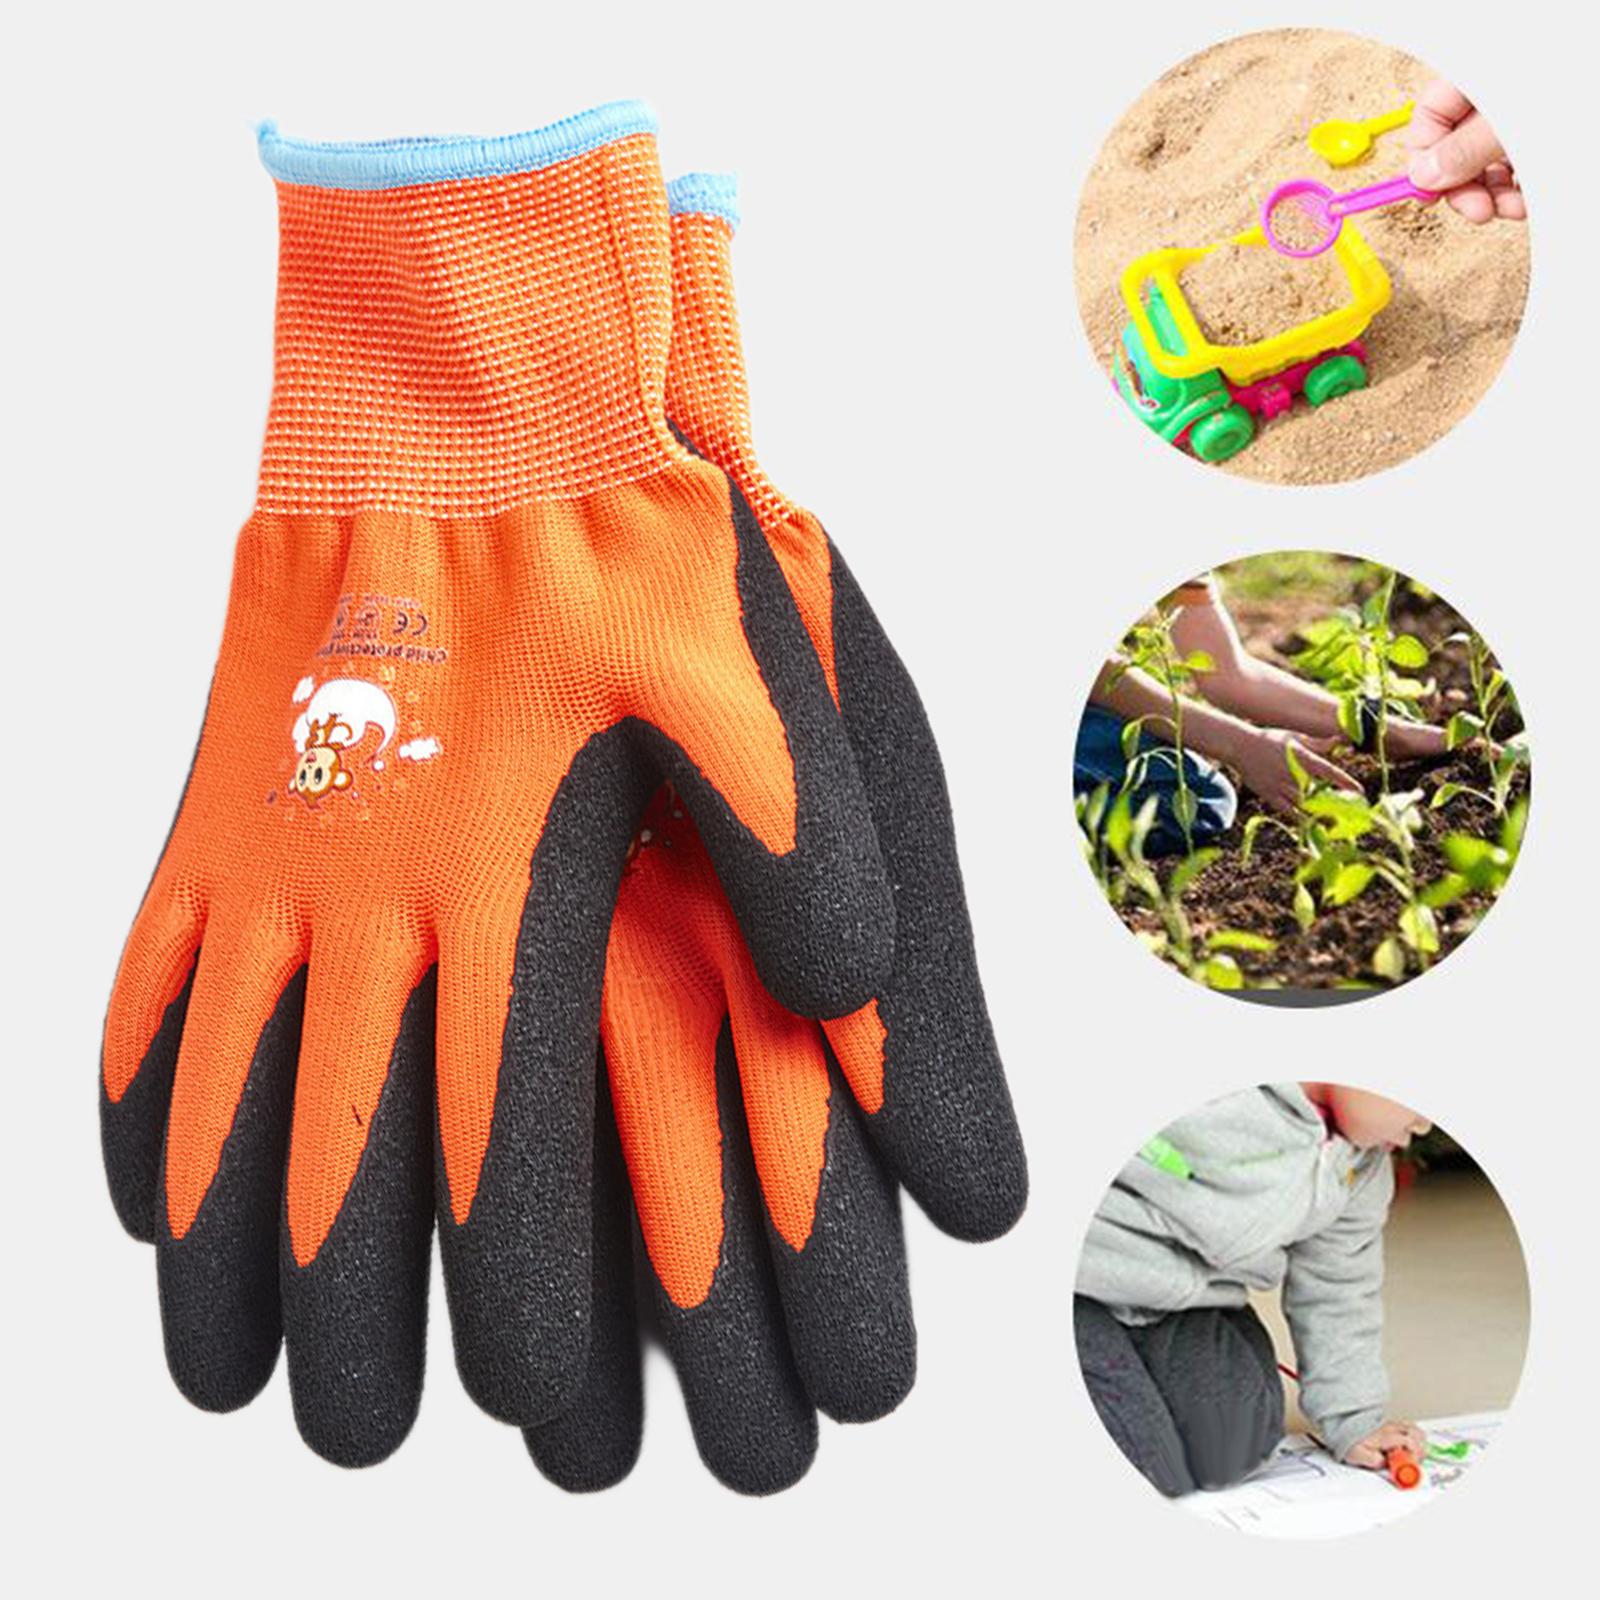 Kids Gardening Gloves DIY Painting Gloves Rubber Coated Palm Hand Protection for 4 to 8 Ages C